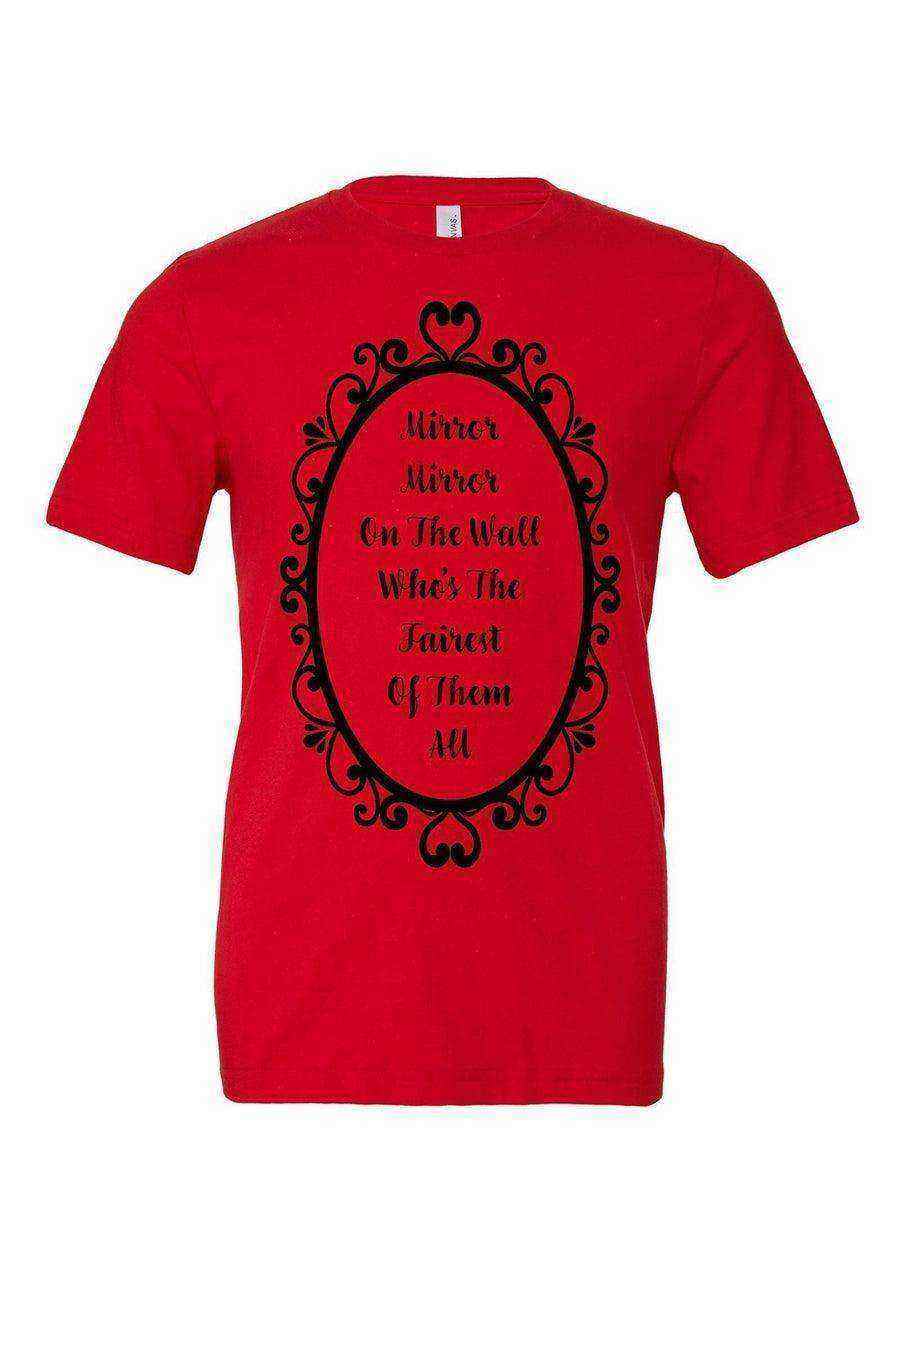 Snow White Tee Mirror Mirror on The Wall - Dylan's Tees